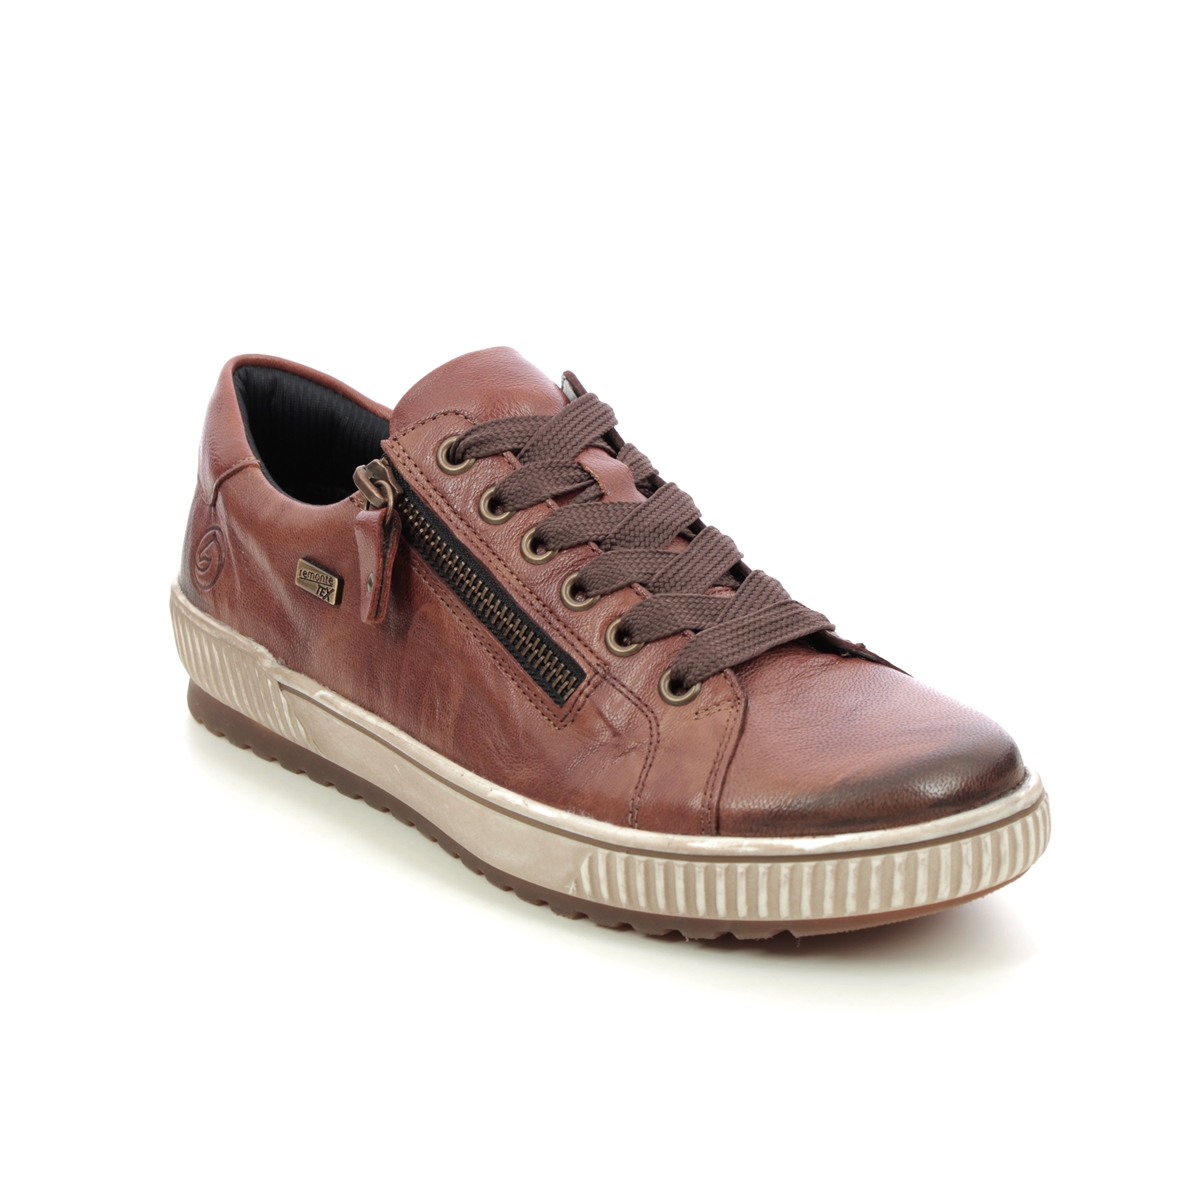 Remonte Tanash Tex Tan Leather Womens Lacing Shoes D0700-22 In Size 38 In Plain Tan Leather